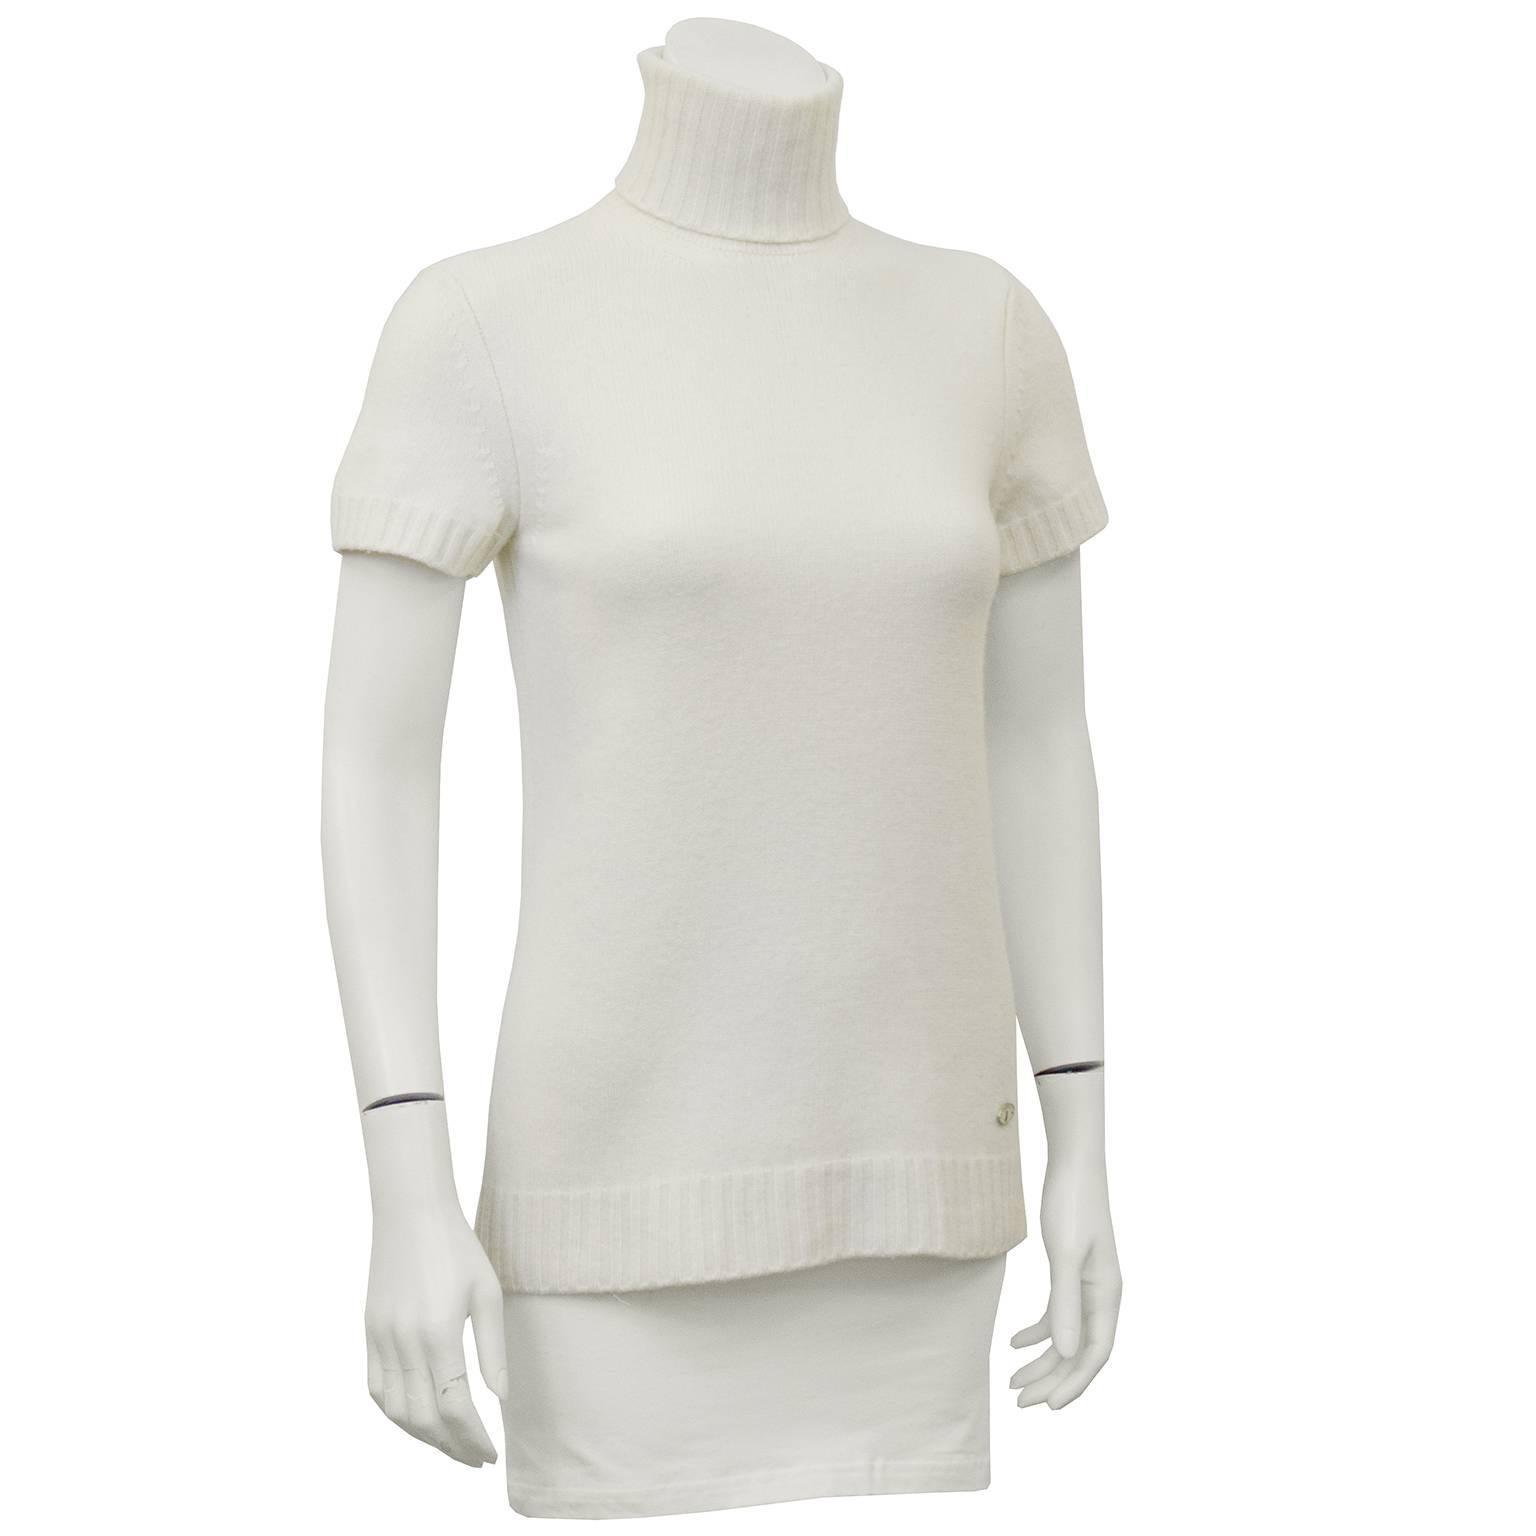 Early 2000's Chanel cream knit short sleeve turtleneck. Turtleneck folds over for a cozy look and has a short zip closure at back. Ribbed trim at neck, sleeves and hem. All labels have been removed, but small Chanel key lock logo on the left bottom